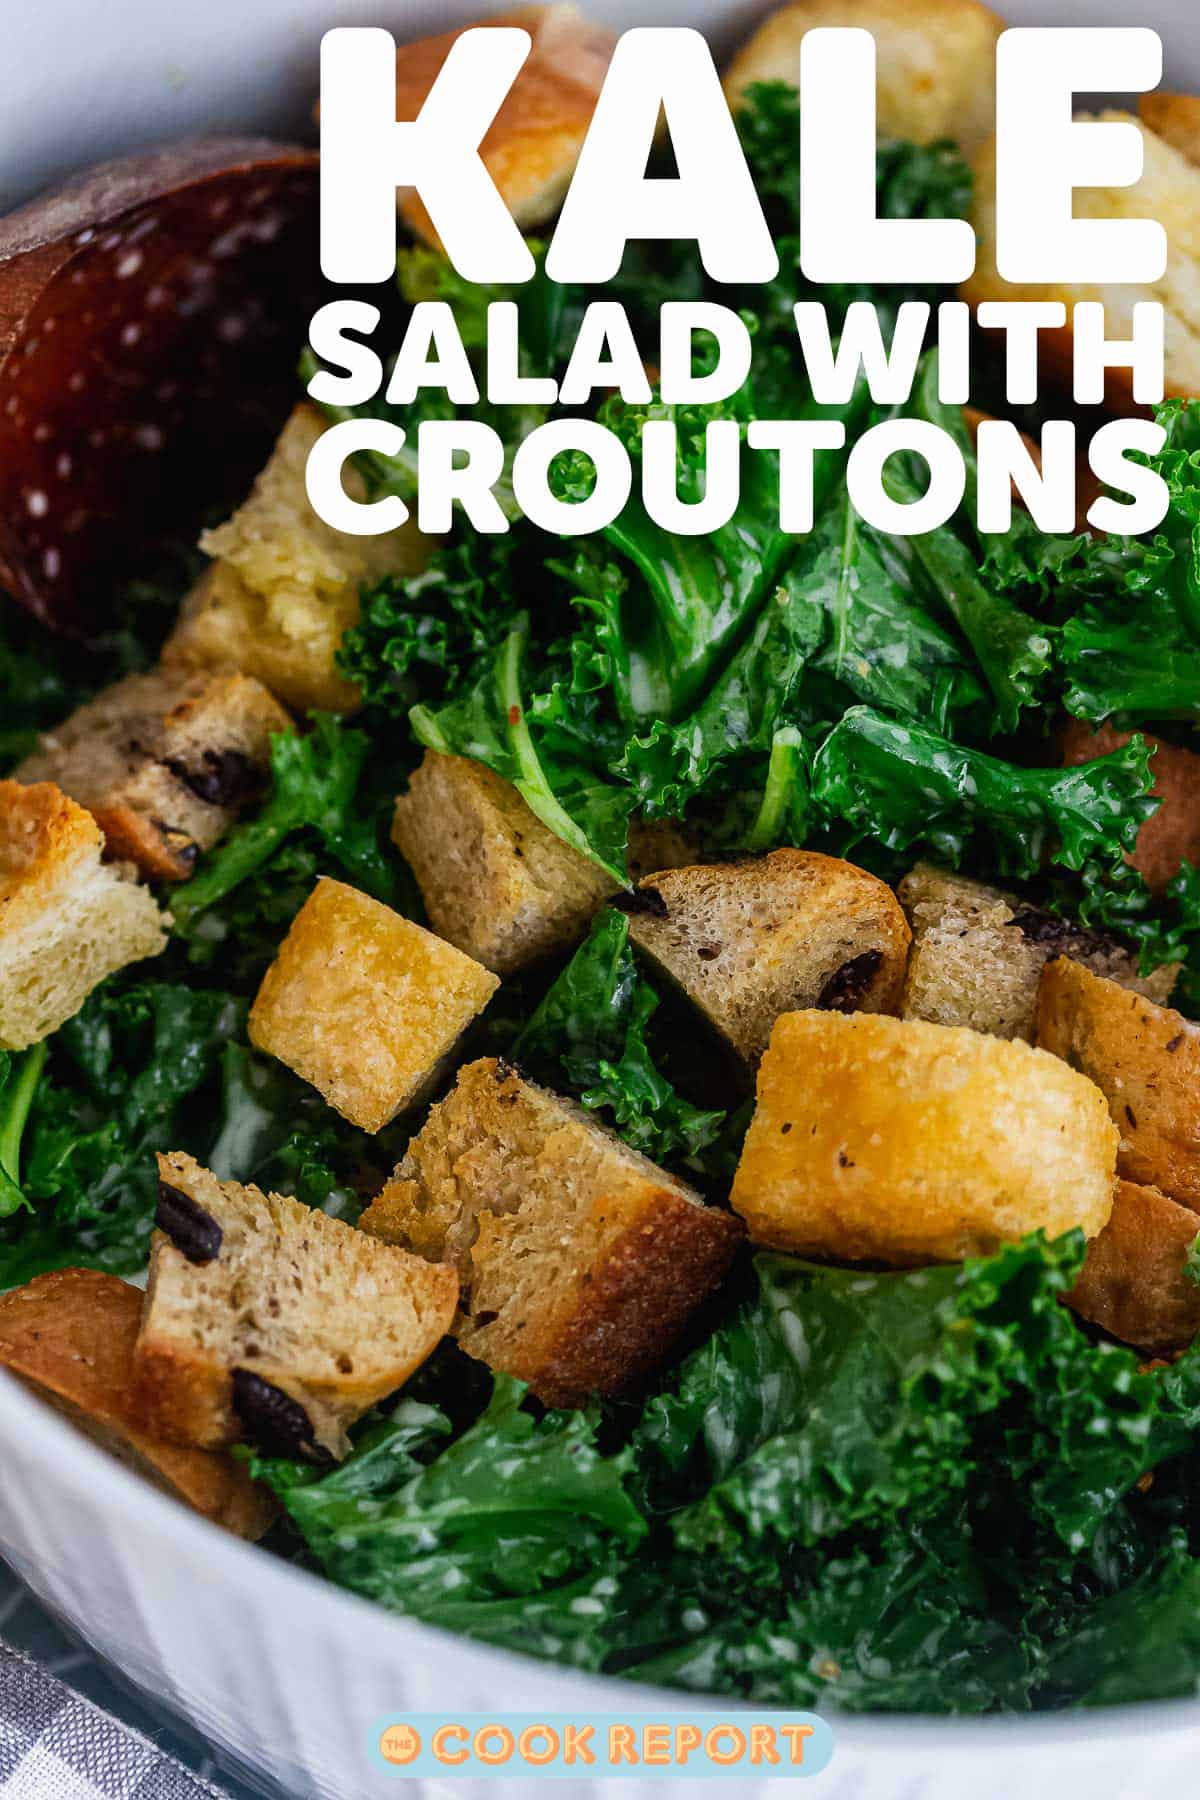 Pinterest image of kale salad with text overlay